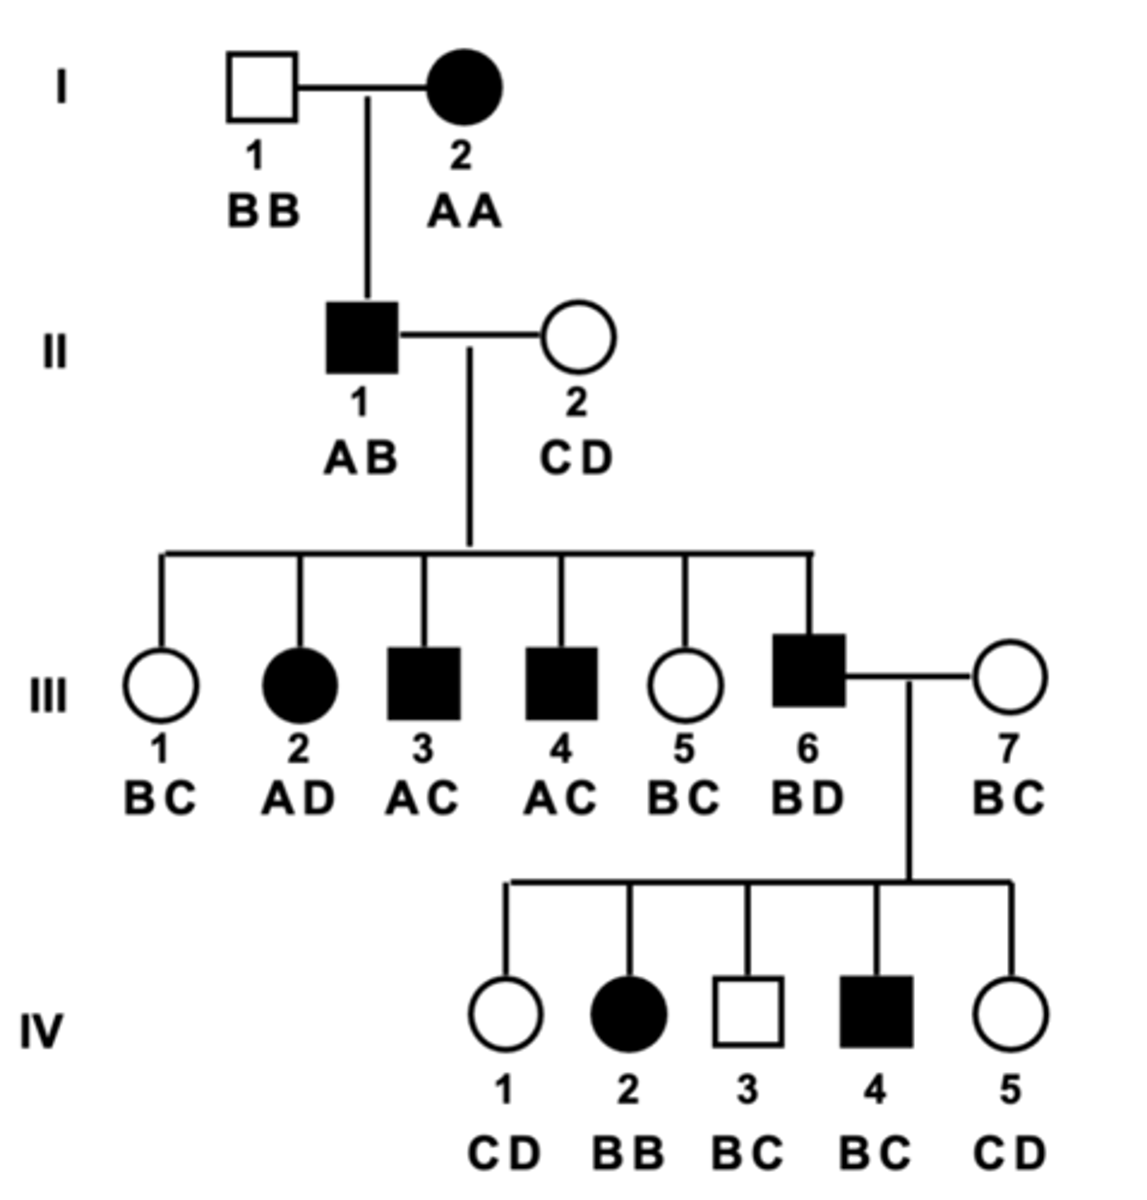 <p>Below is the pedigree for a family that carries an autosomal dominant disorder that has complete penetrance and invariable expressivity. The mutation causing this disorder is LINKED to a DNA marker locus with four alleles A, B, C, and D. The marker alleles present within each individual are indicate below the pedigree symbols. Which individual in generation III is likely to be recombinant?</p>